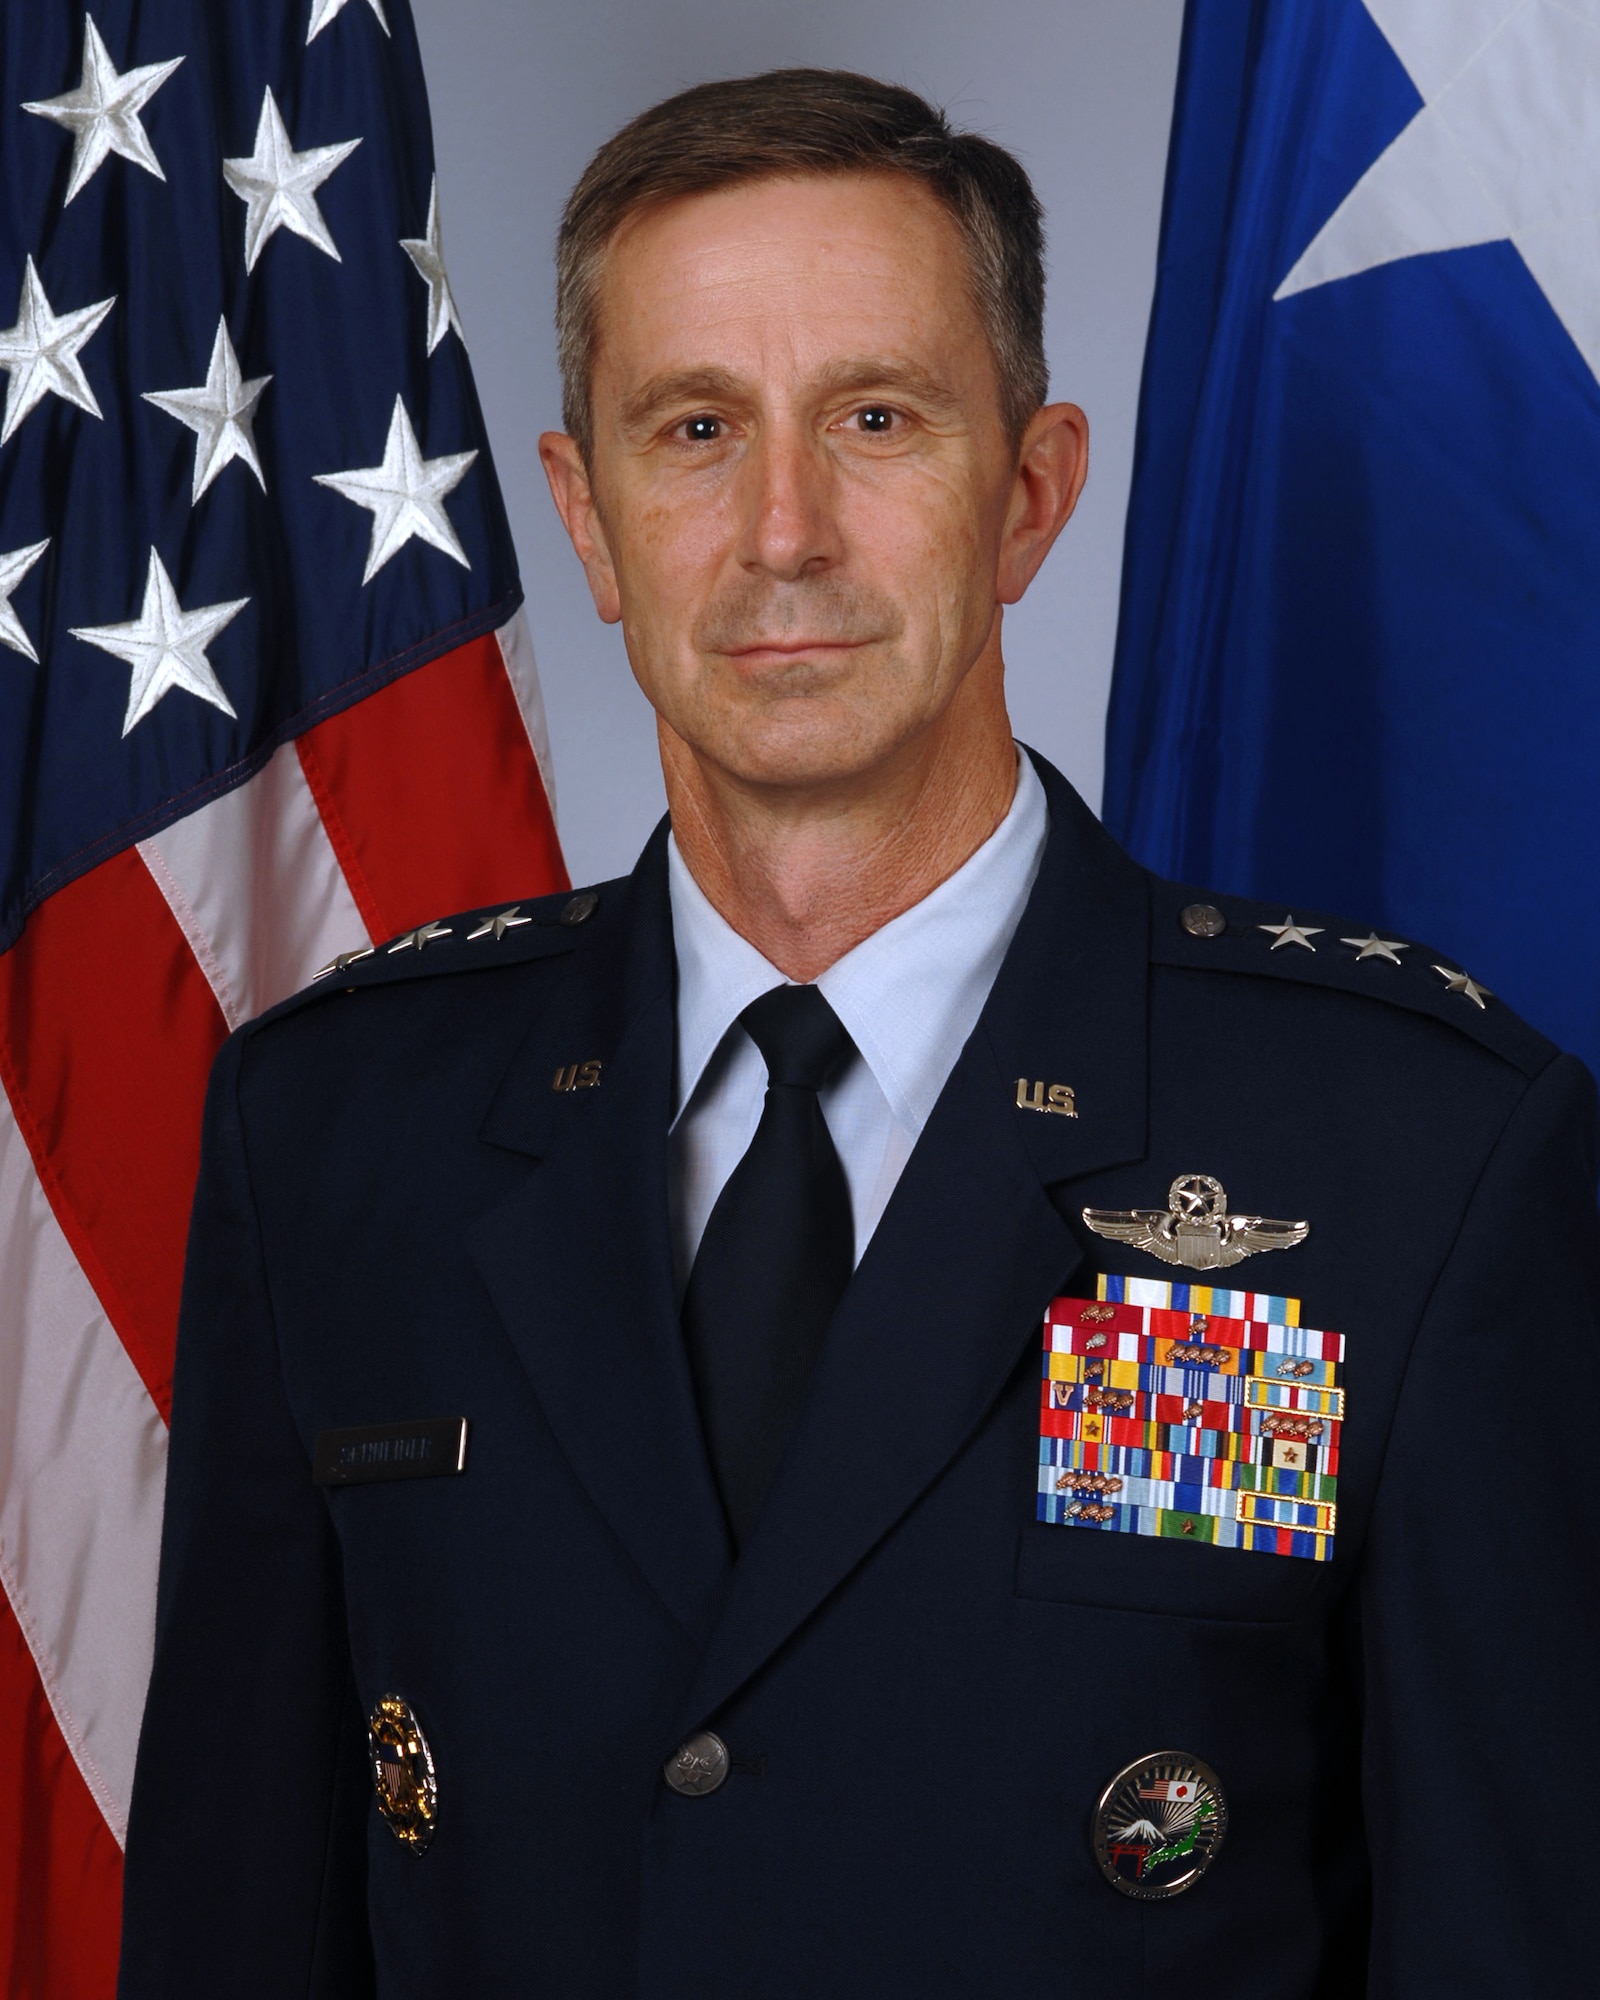 Lt. Gen. Kevin B. Schneider is the Commander, U.S. Forces Japan, and Commander, 5th Air Force, Pacific Air Forces, Yokota Air Base, Japan and is the senior U.S. military representative in Japan.